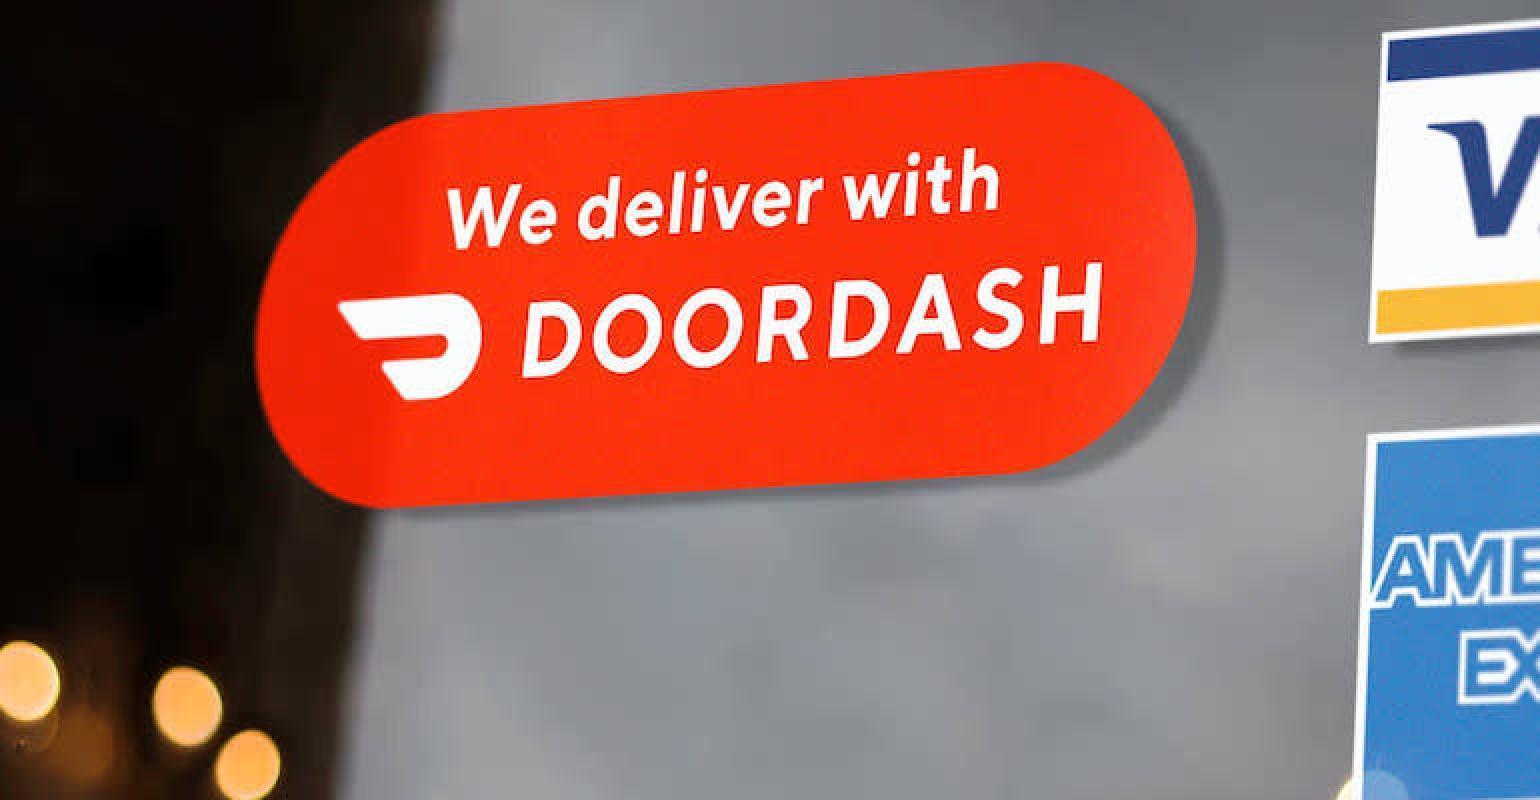 DoorDash's Grocery Business Fuels Growth to 532M Orders